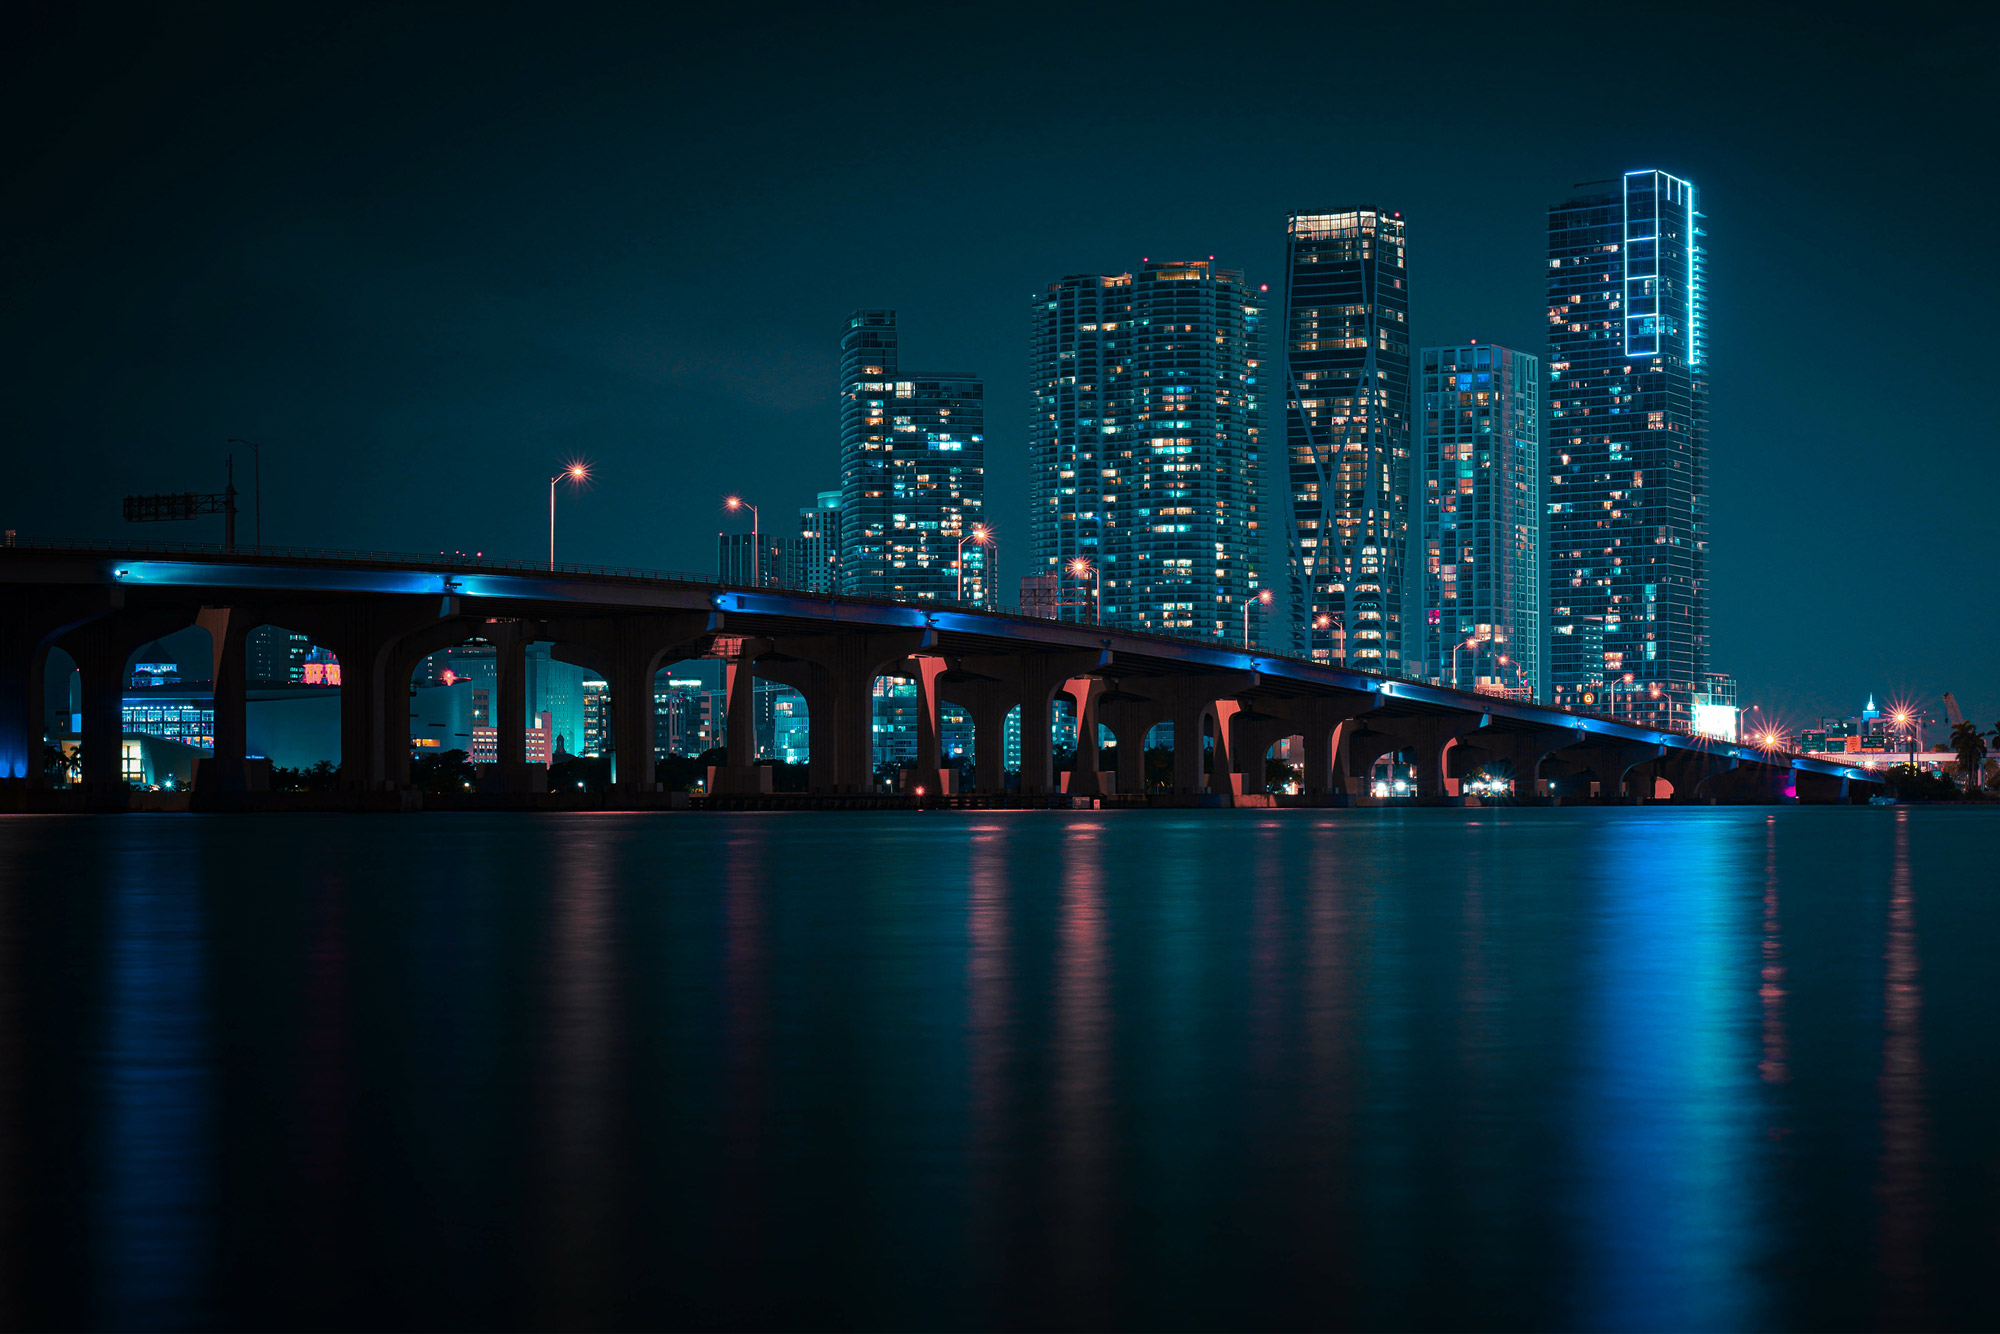 view of Miami's downtown at night